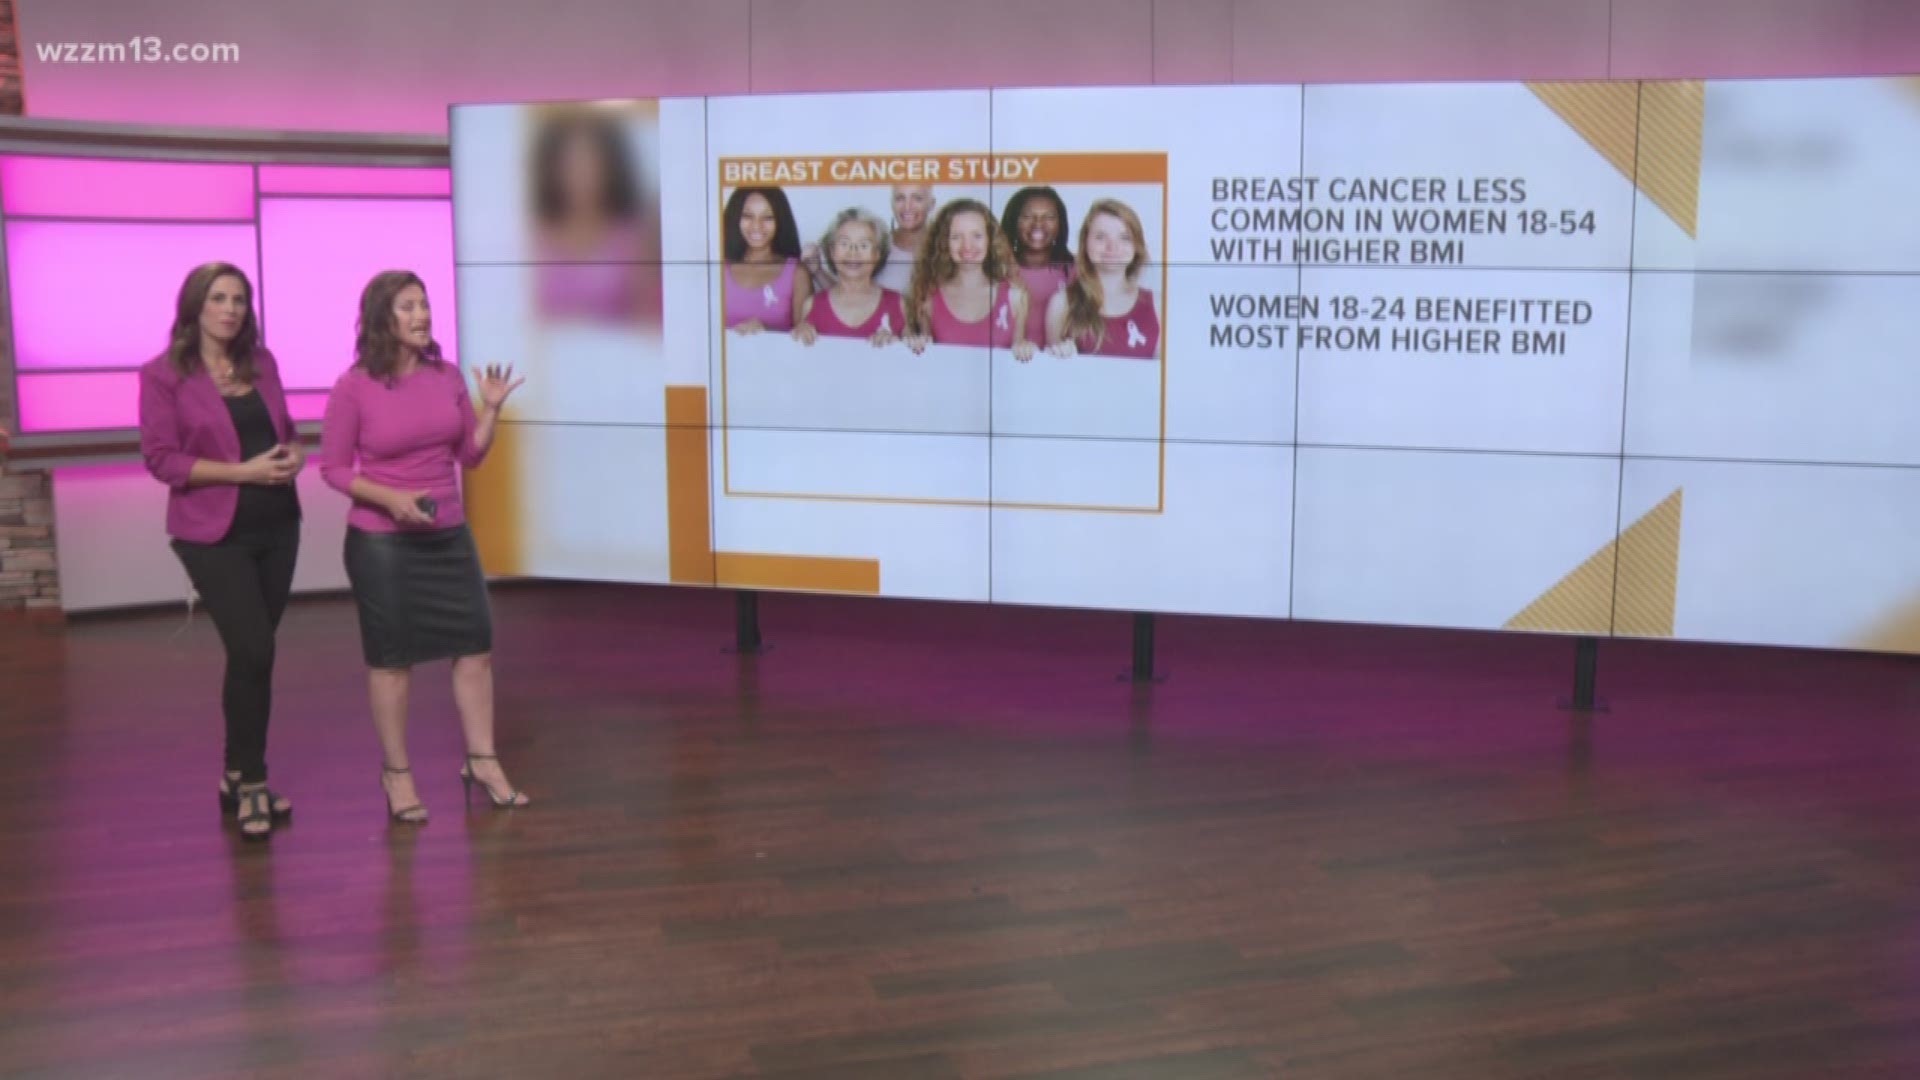 Friends For Life: Obesity and breast cancer risk